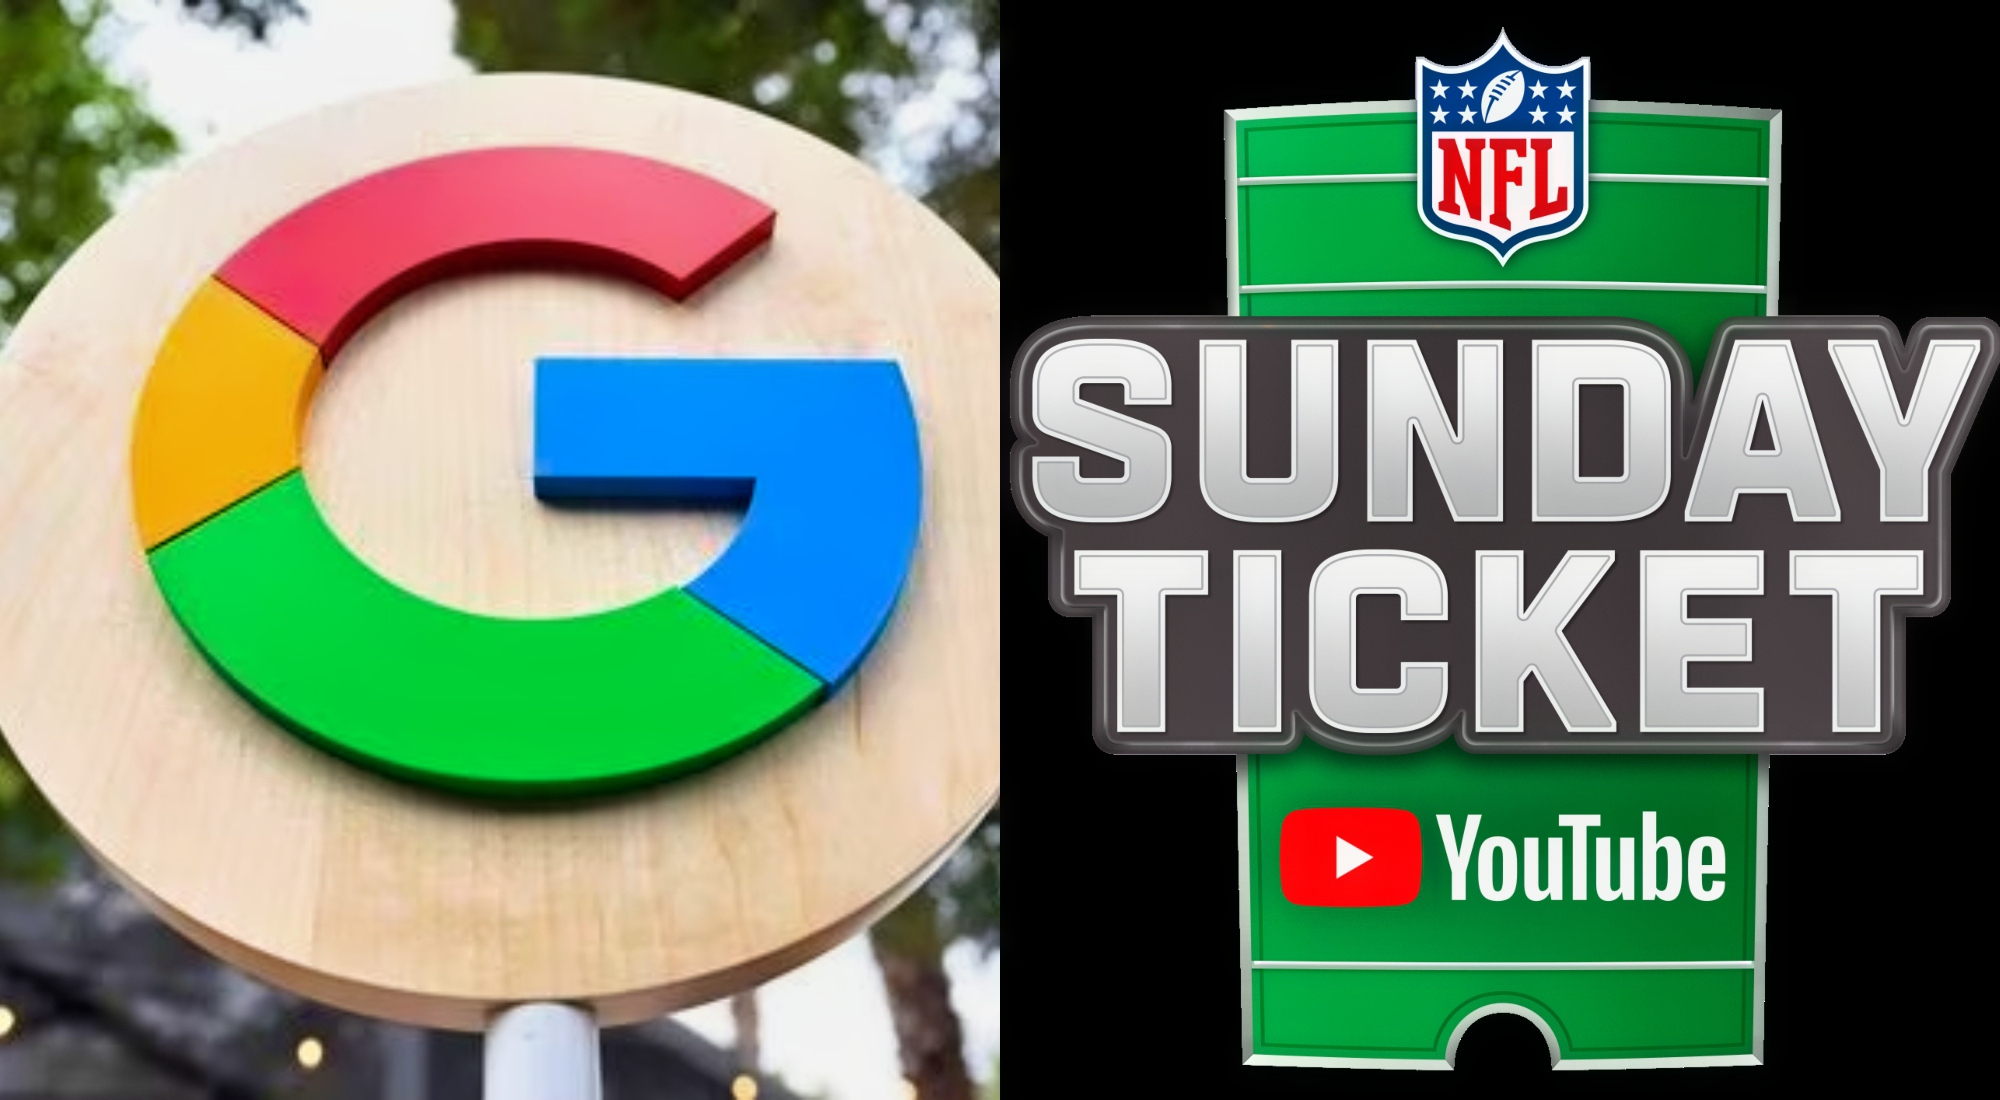 Google facing $6 billion lawsuit over information related to 'NFL Sunday  Ticket' deal